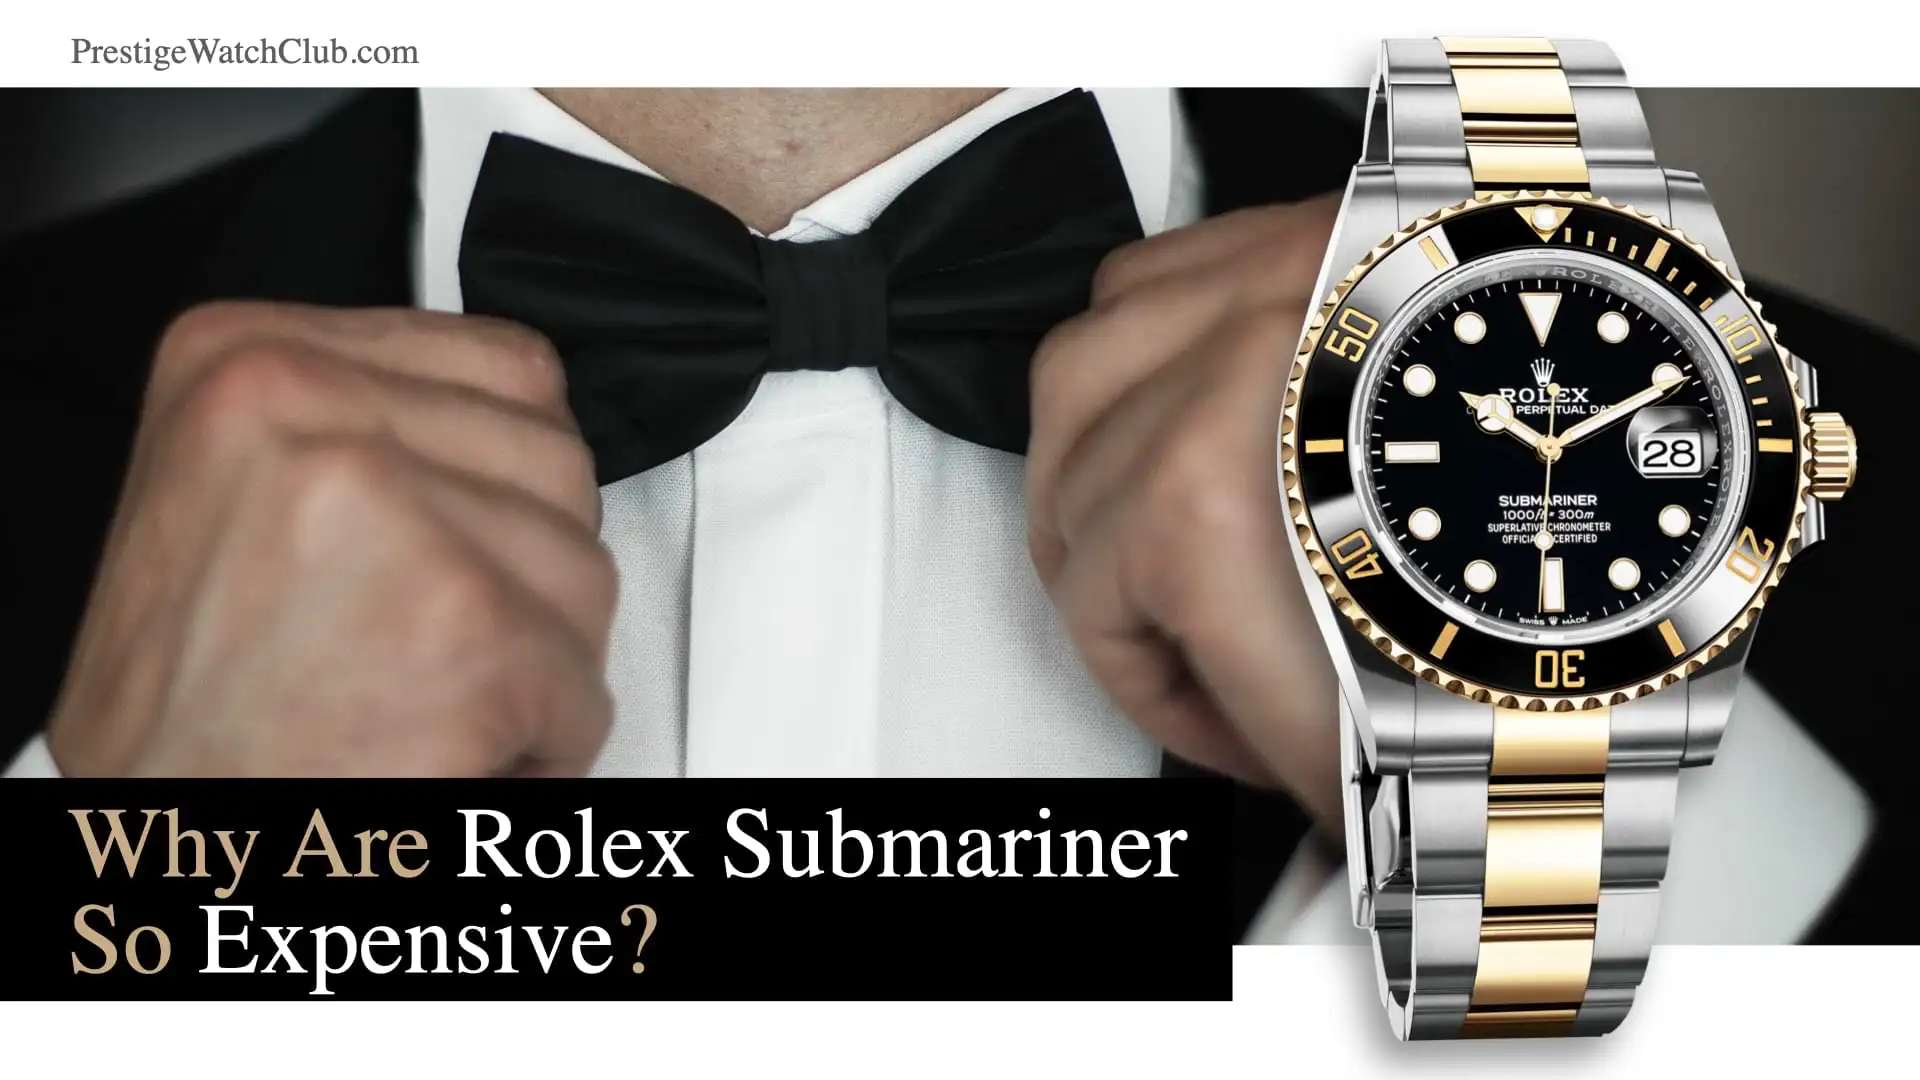 Why Are Rolex Submariner So Expensive?